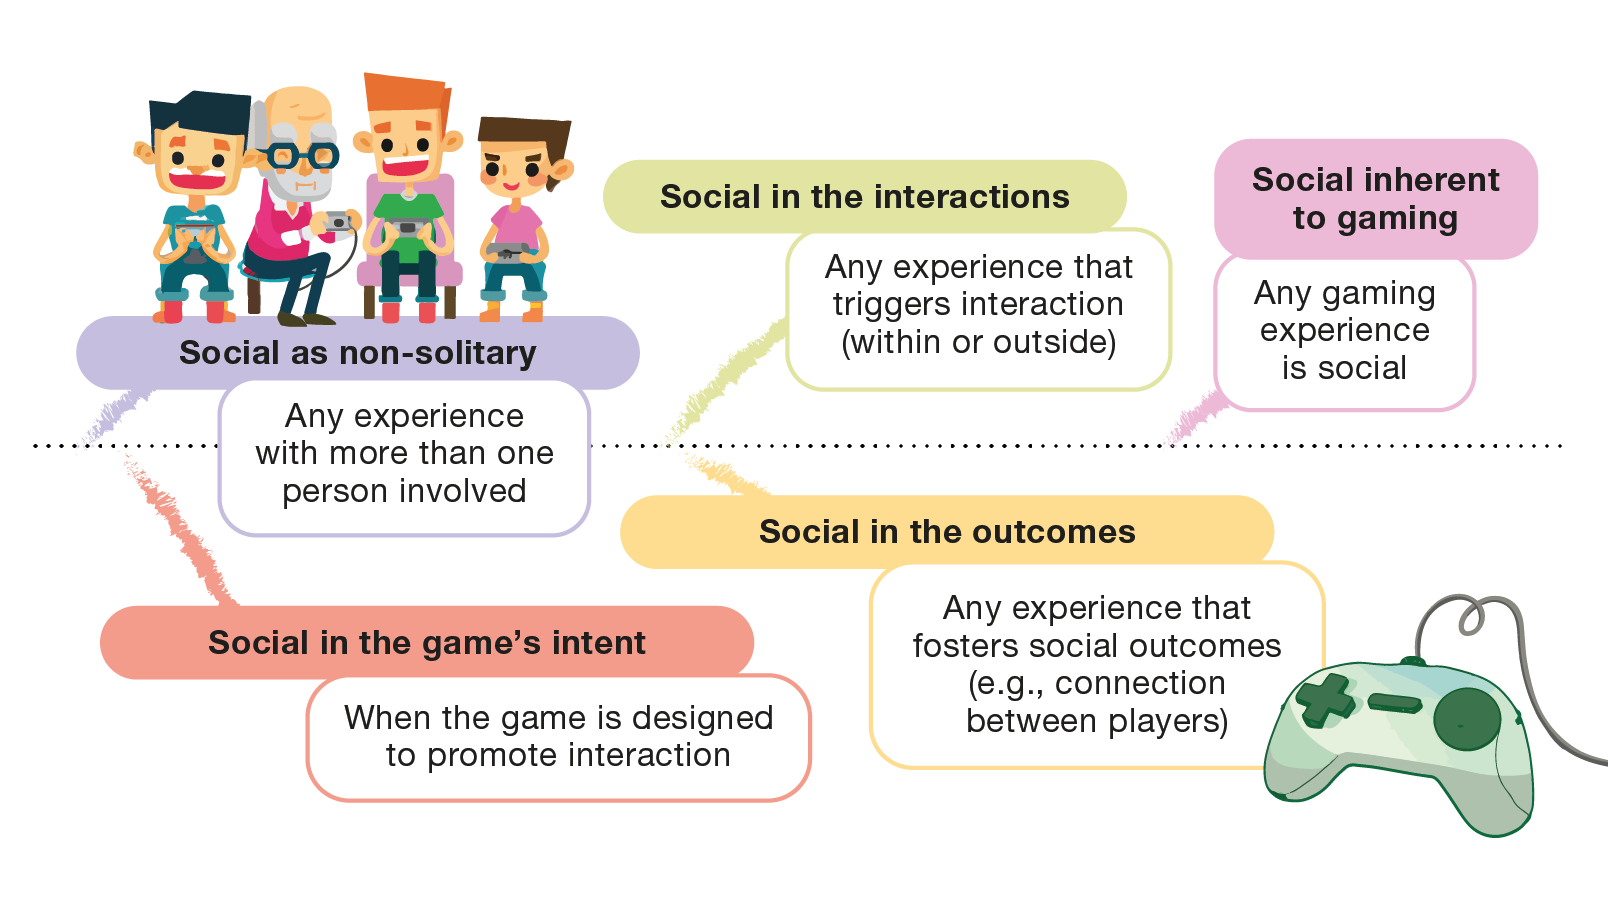 A diagram built around an horizontal line that represents the spectrum of definitions for social gaming identified in the work. The definitions are: Social as non-solitary, Social in the game's intent, Social in the interactions, Social in the outcomes, and Social inherent to gaming.